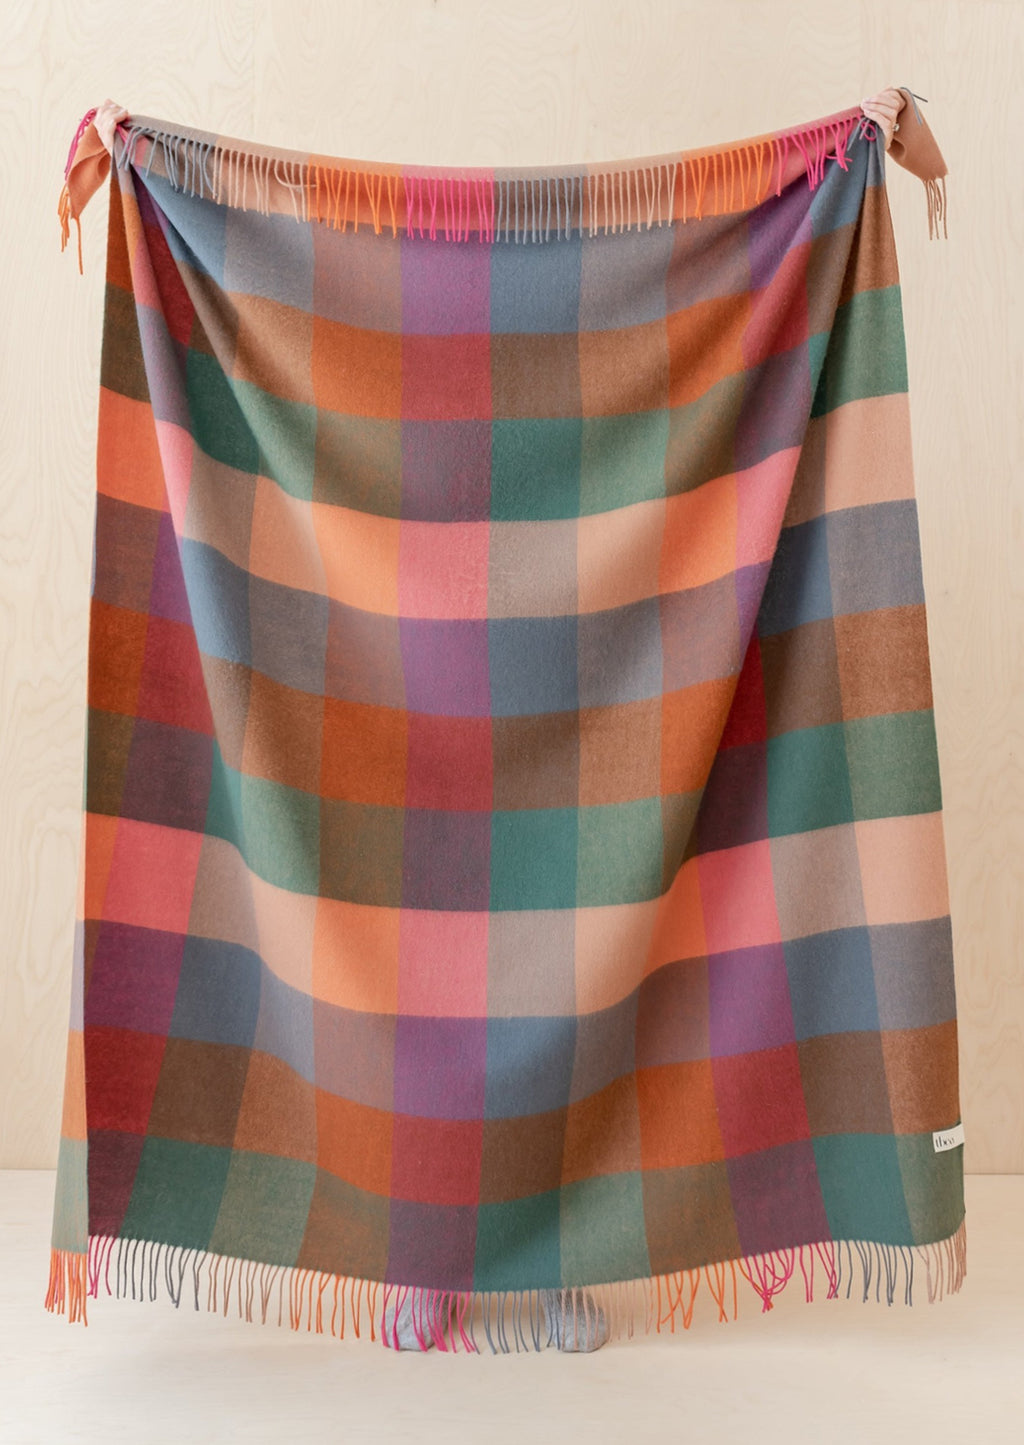 1: A madras check print wool throw in shades of peach, pink, teal, orange and blue.